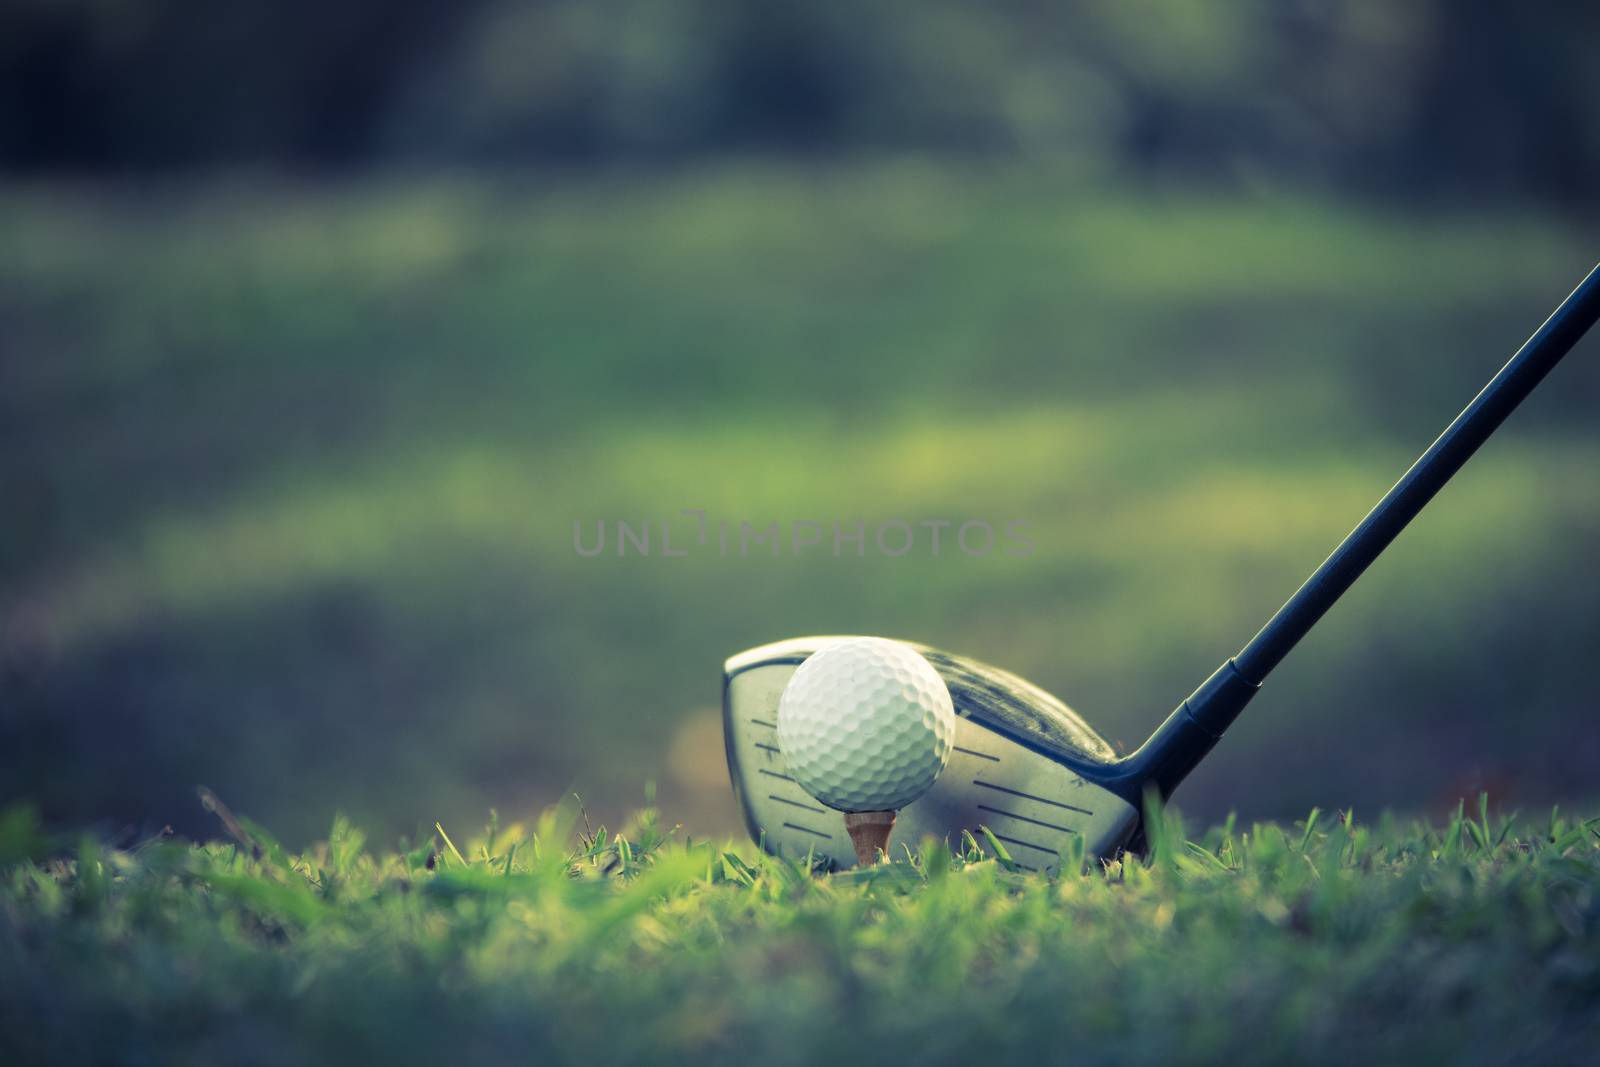 Close up of golf ball on a tee with golf club on the fairway. by ronnarong